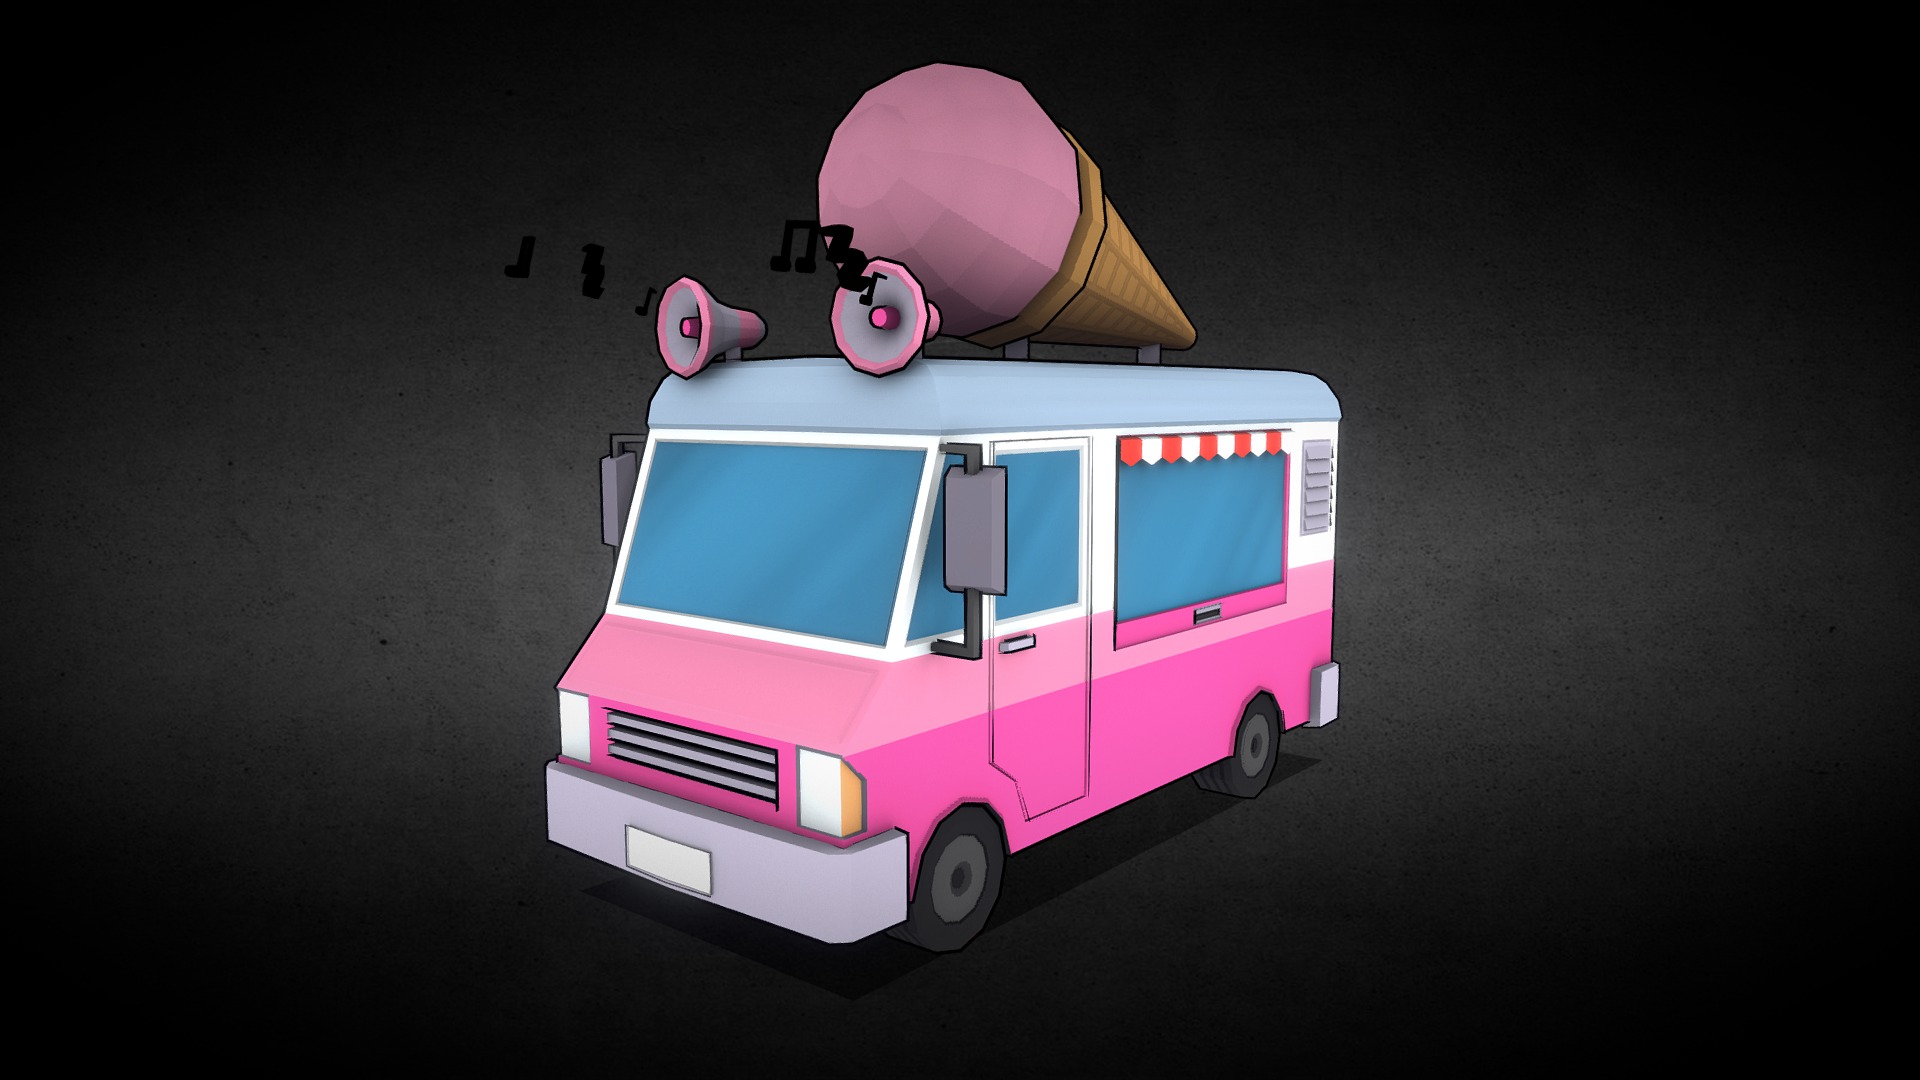 3D model Toon IceCream Truck - This is a 3D model of the Toon IceCream Truck. The 3D model is about a toy van with a hat on top.